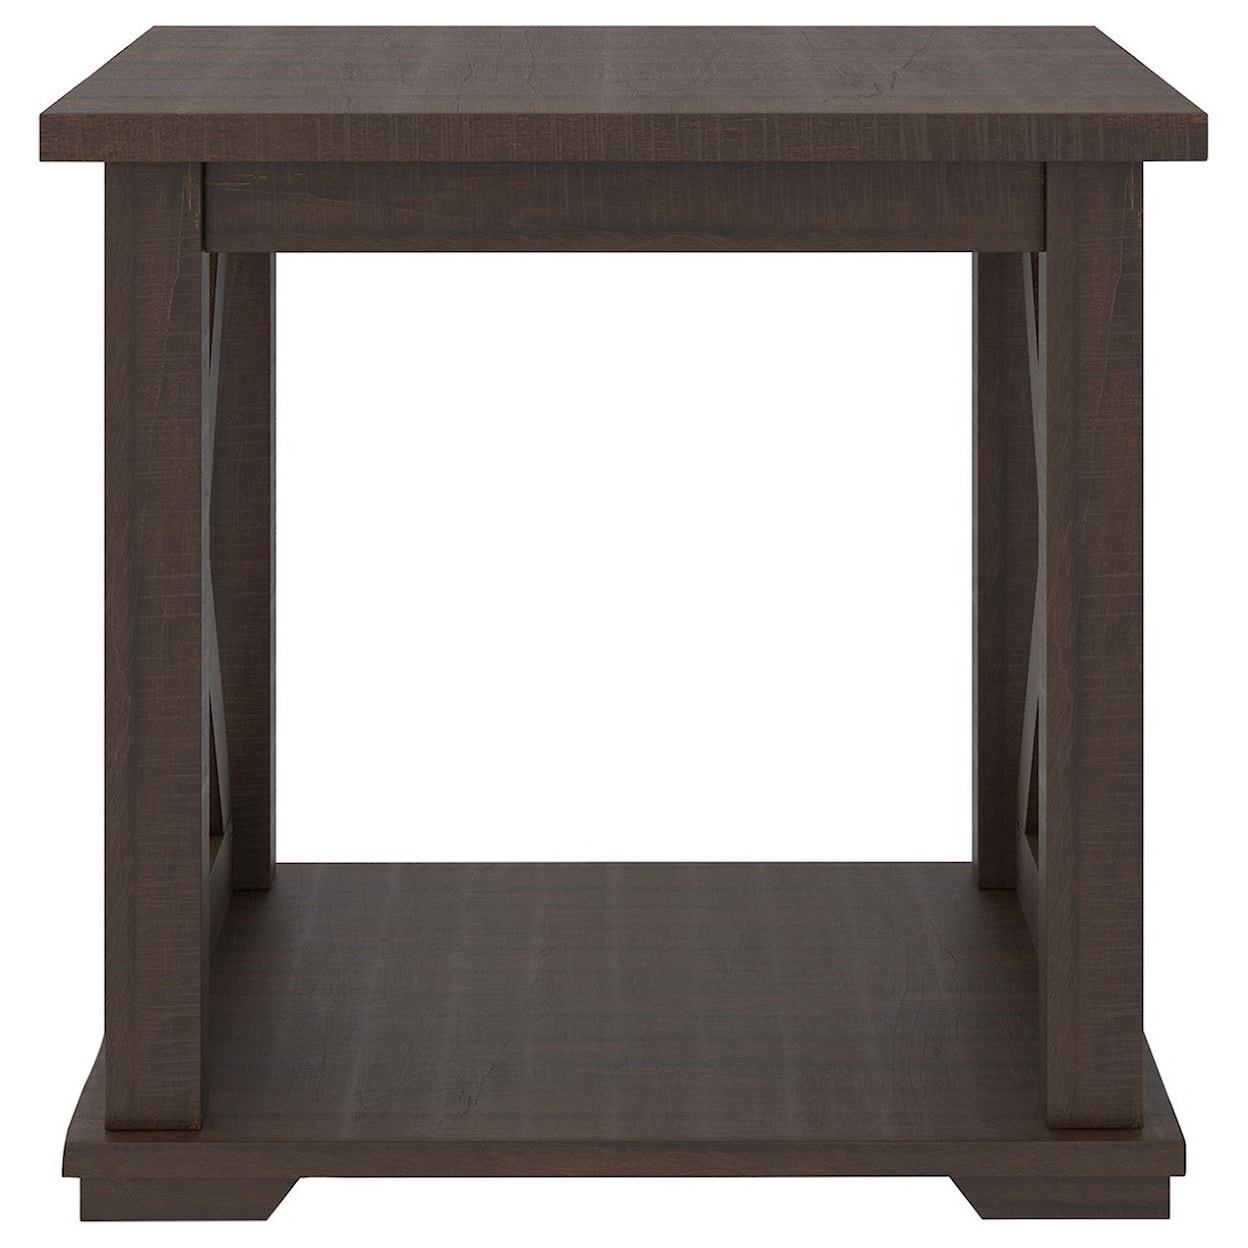 Signature Design by Ashley Camiburg Square End Table